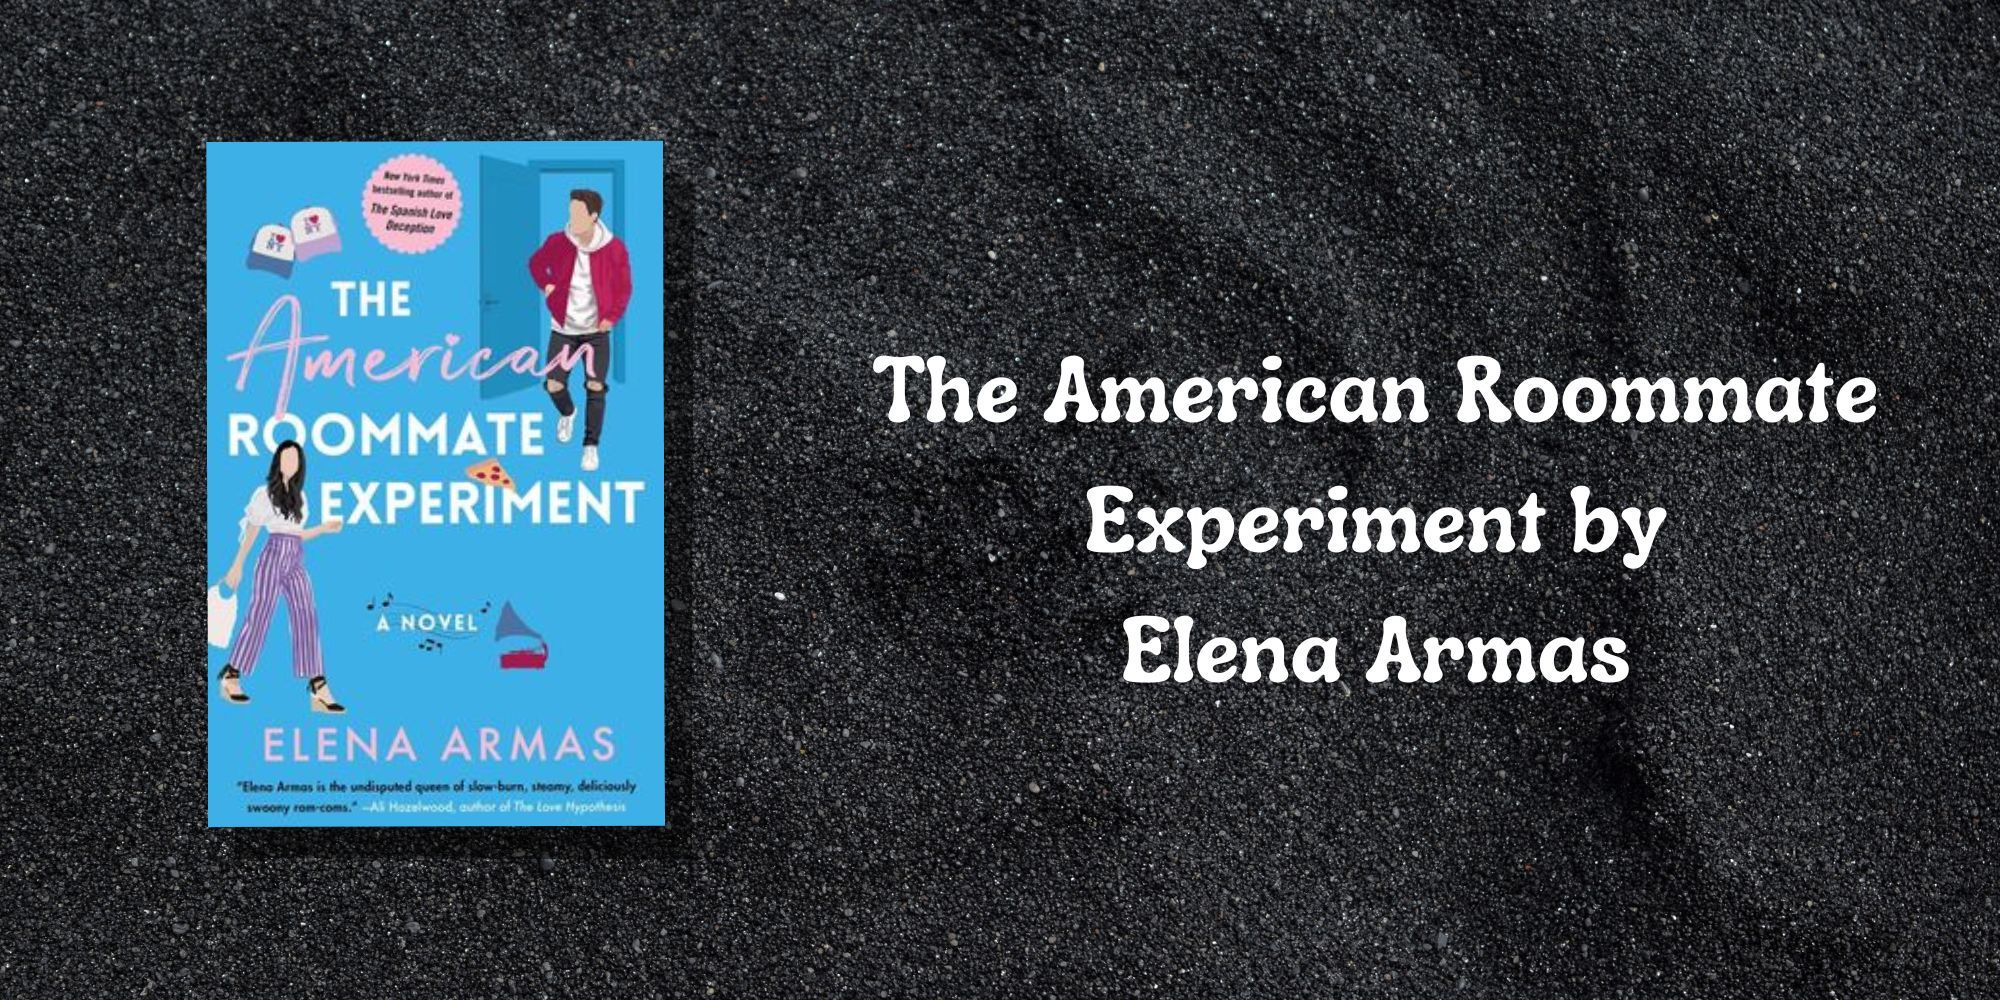 American experiment with Elena Armas roommate